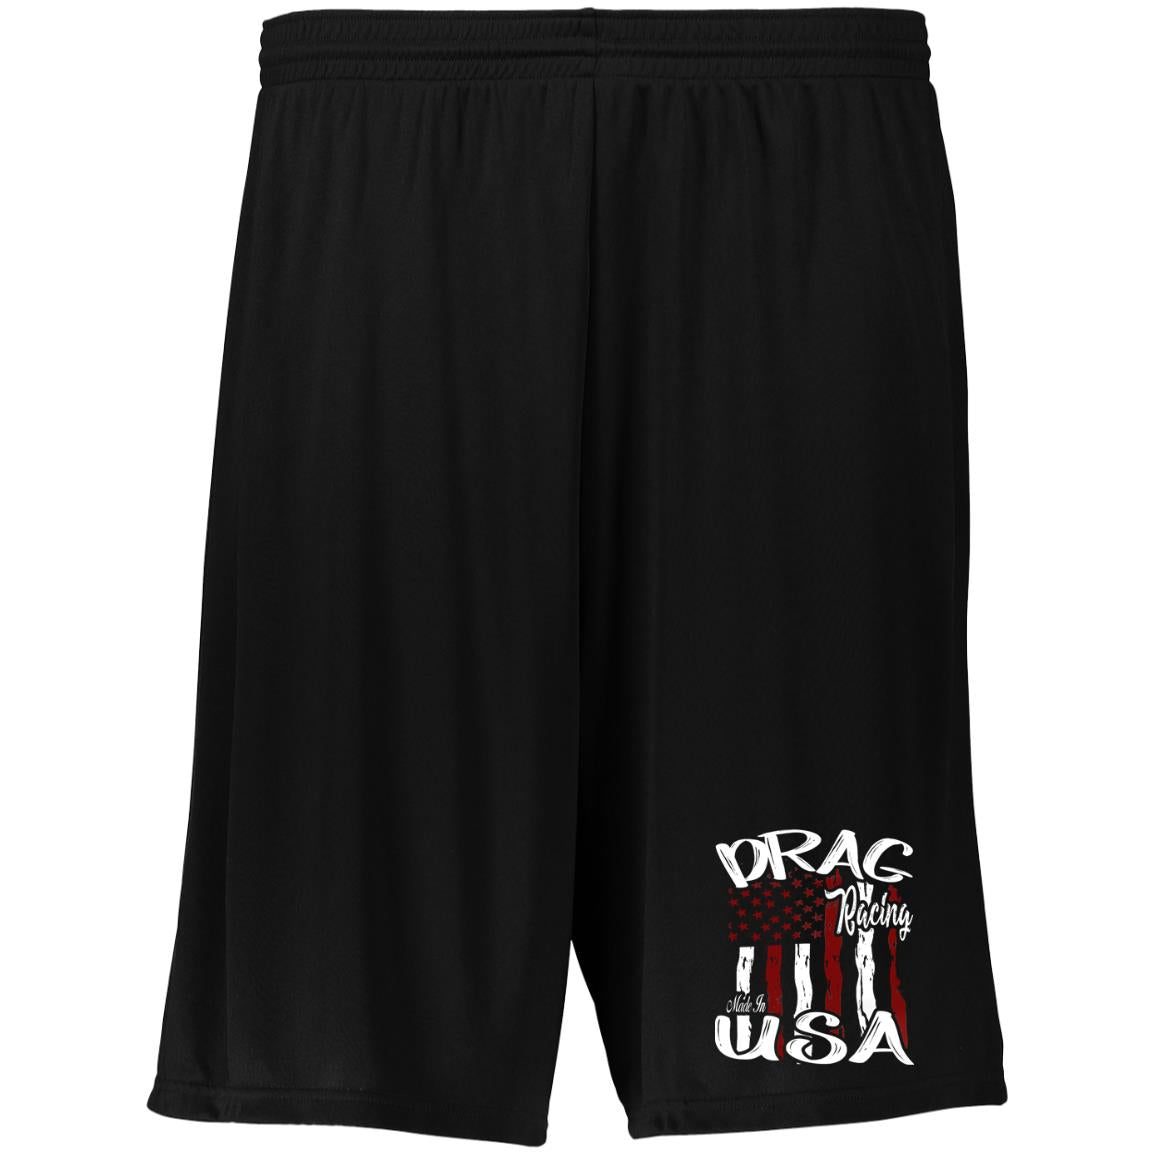 Drag Racing Made In USA Moisture-Wicking 9 inch Inseam Training Shorts